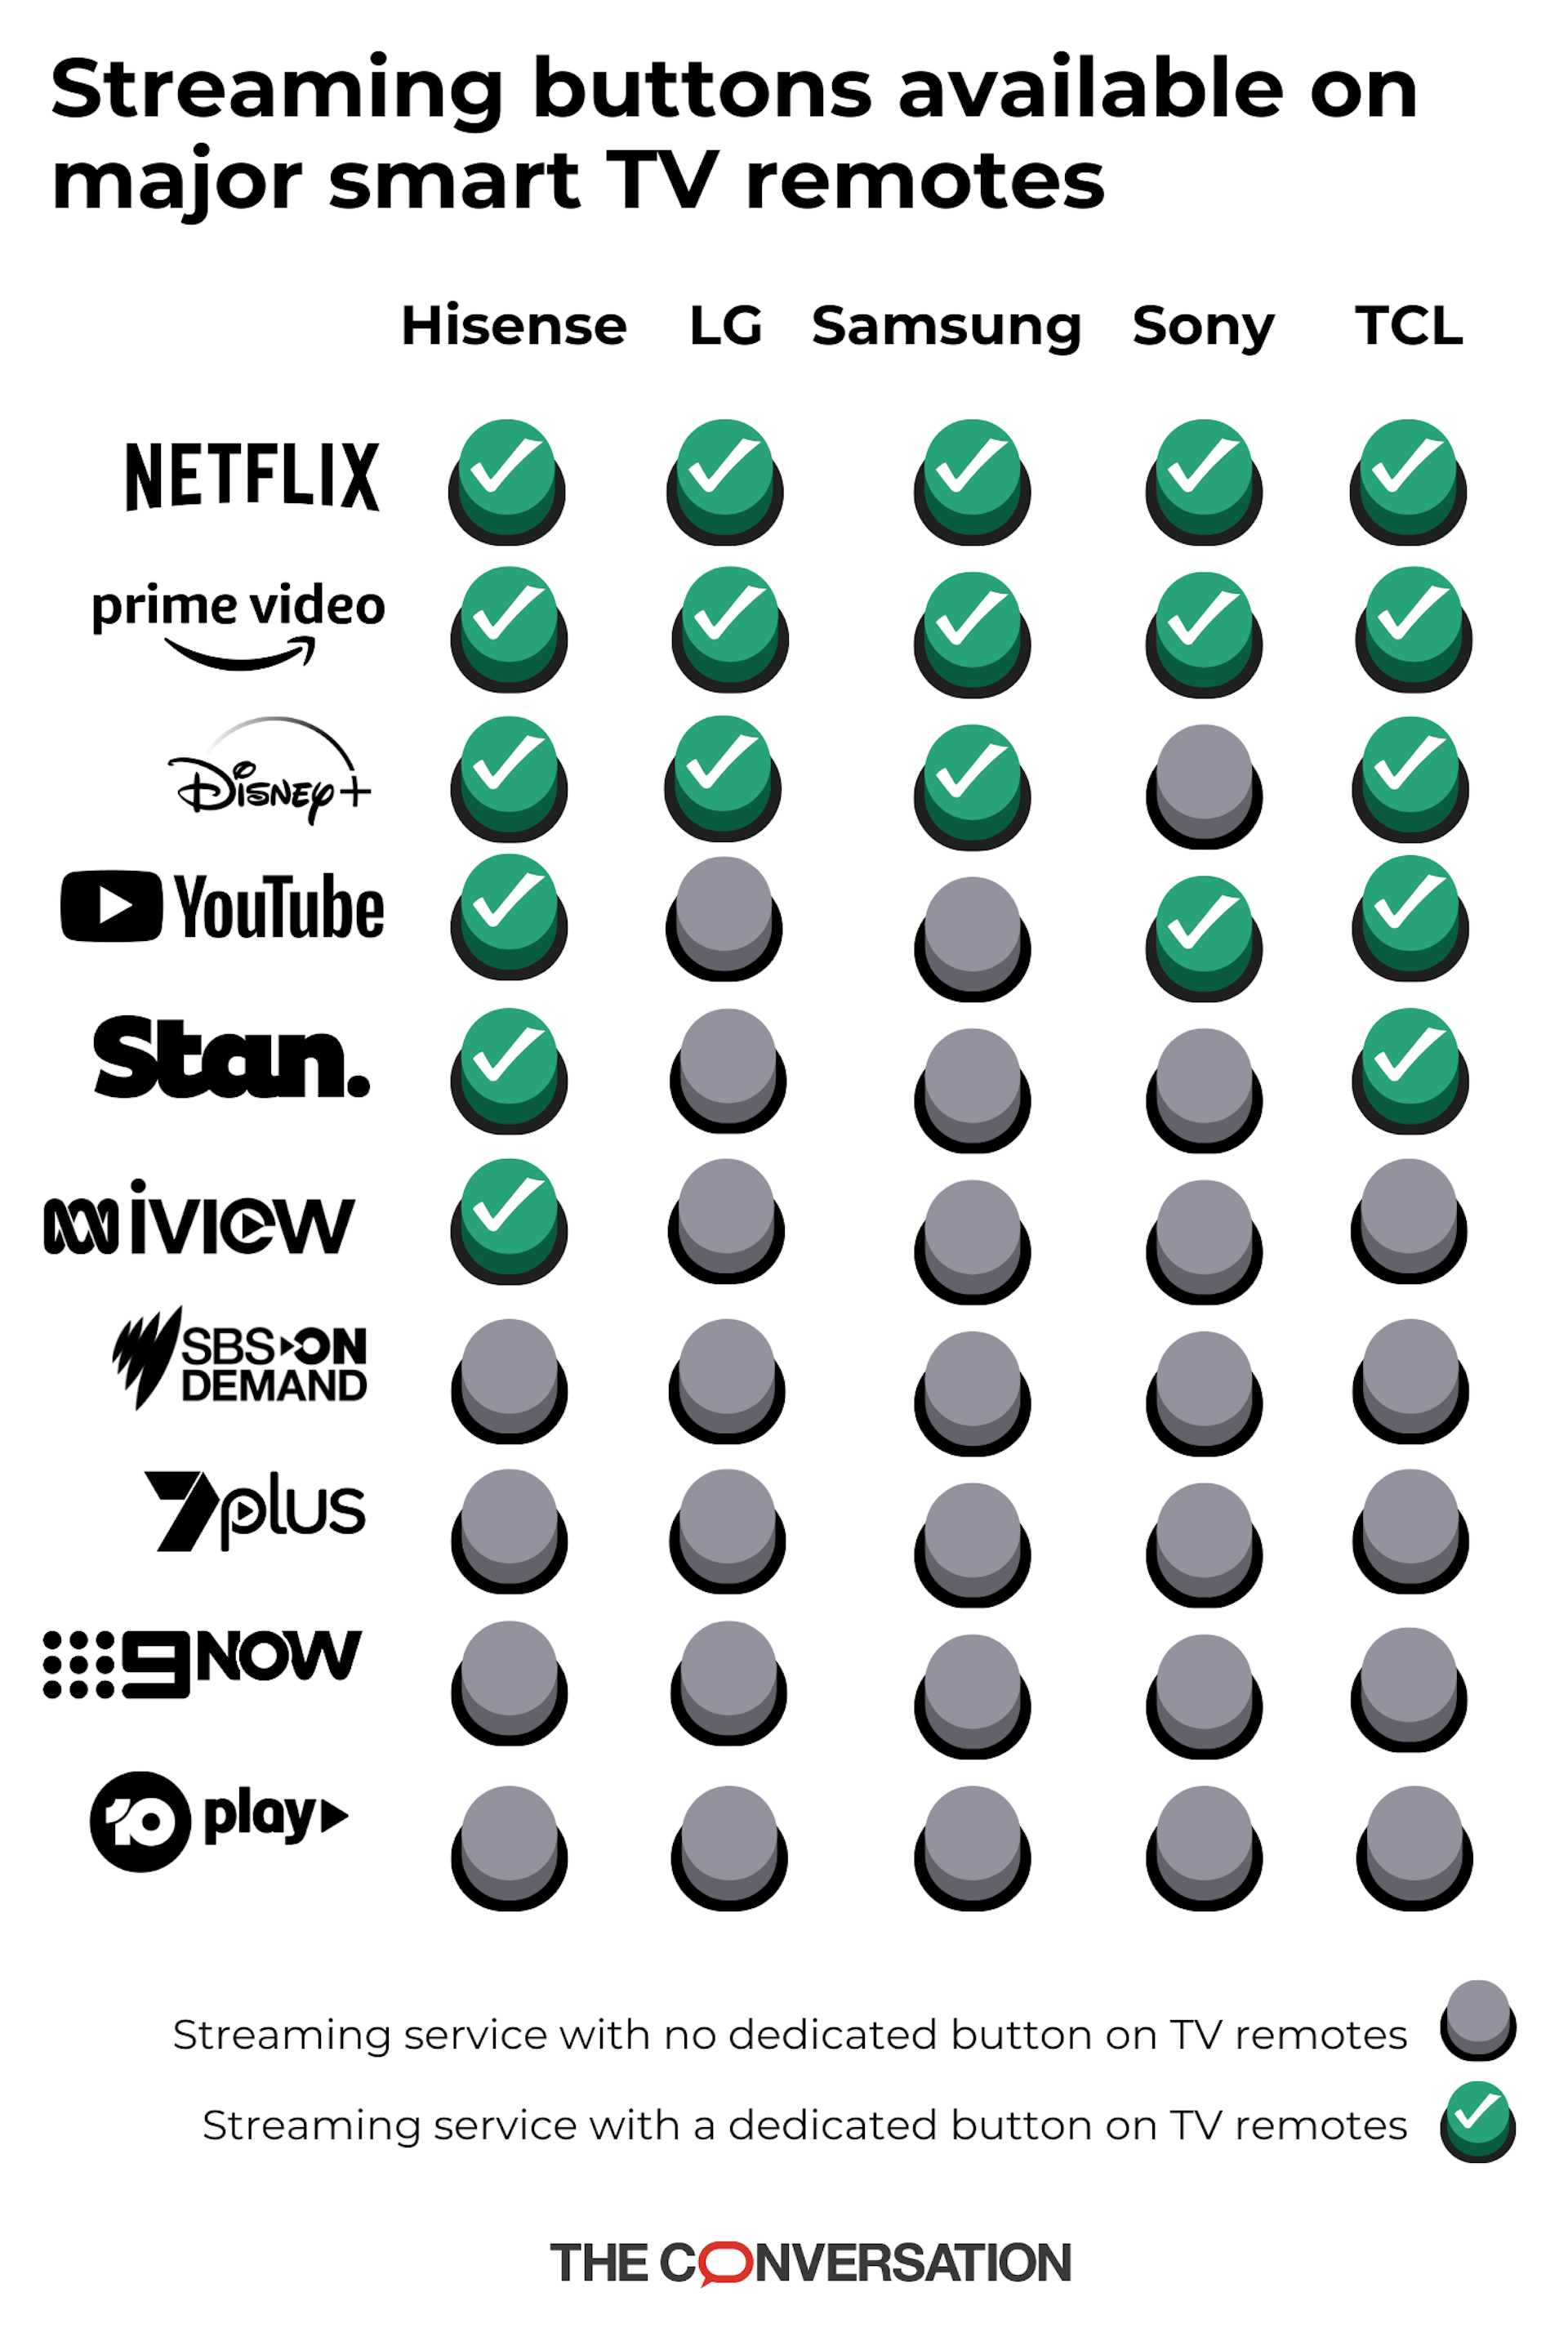 Netflix and other streaming giants pay to get branded buttons on your remote control